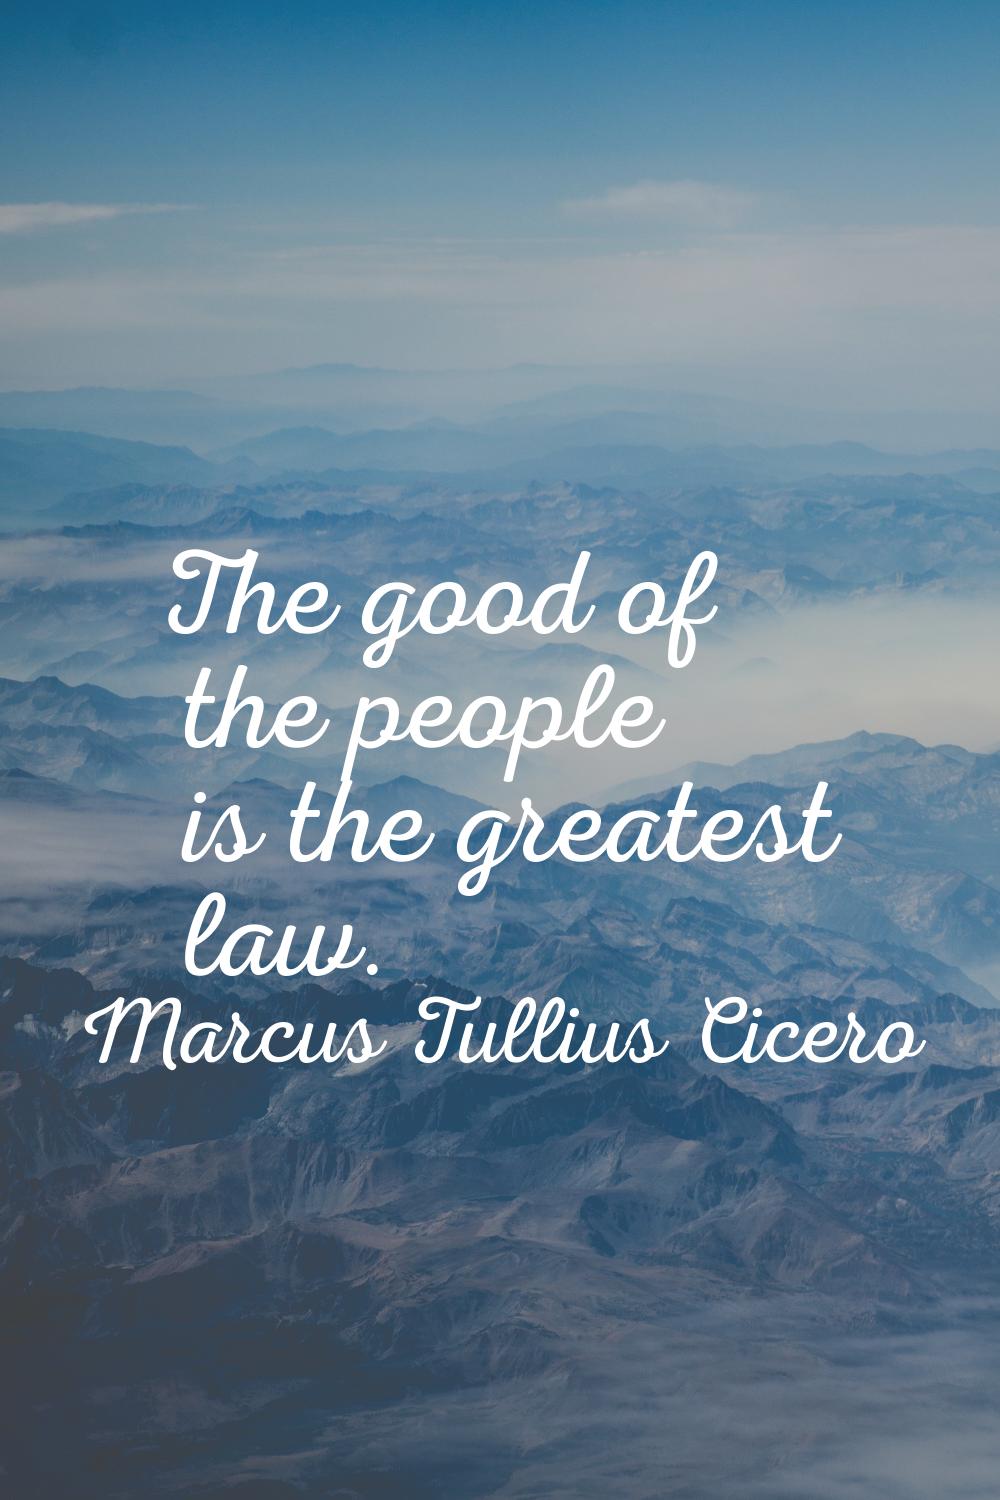 The good of the people is the greatest law.